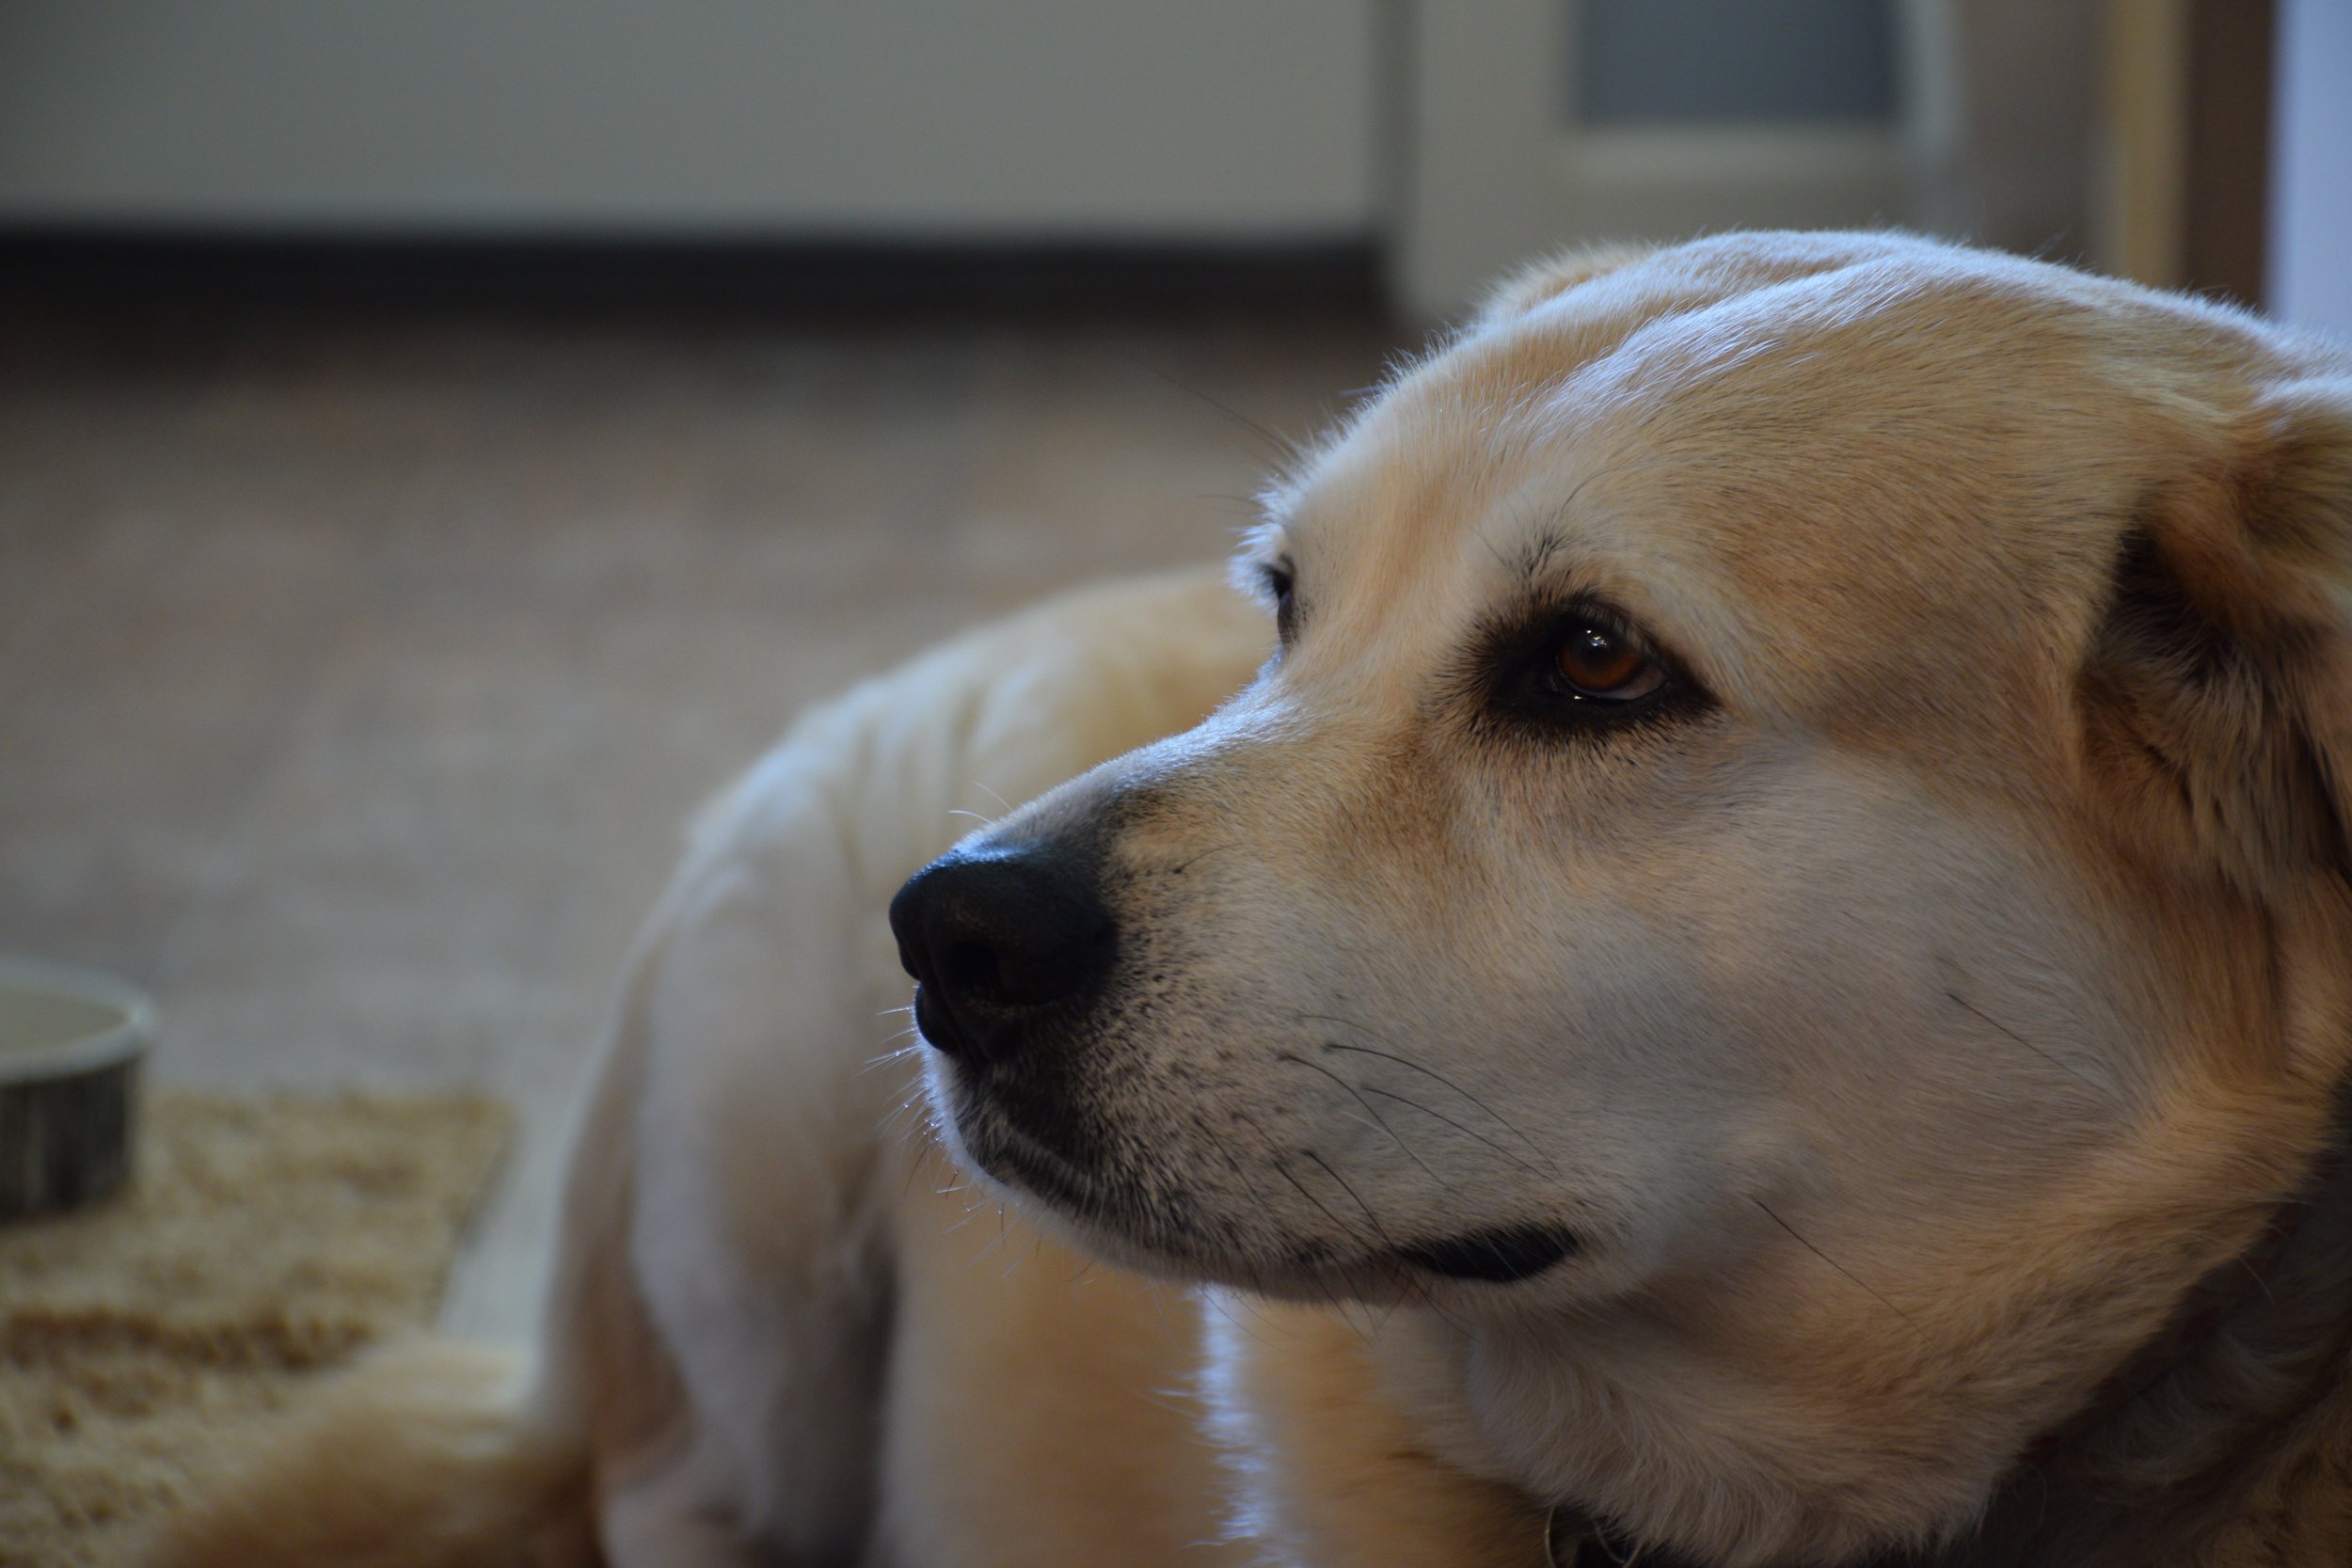 photo by emily reeves dean of yellow lab mix named blanche